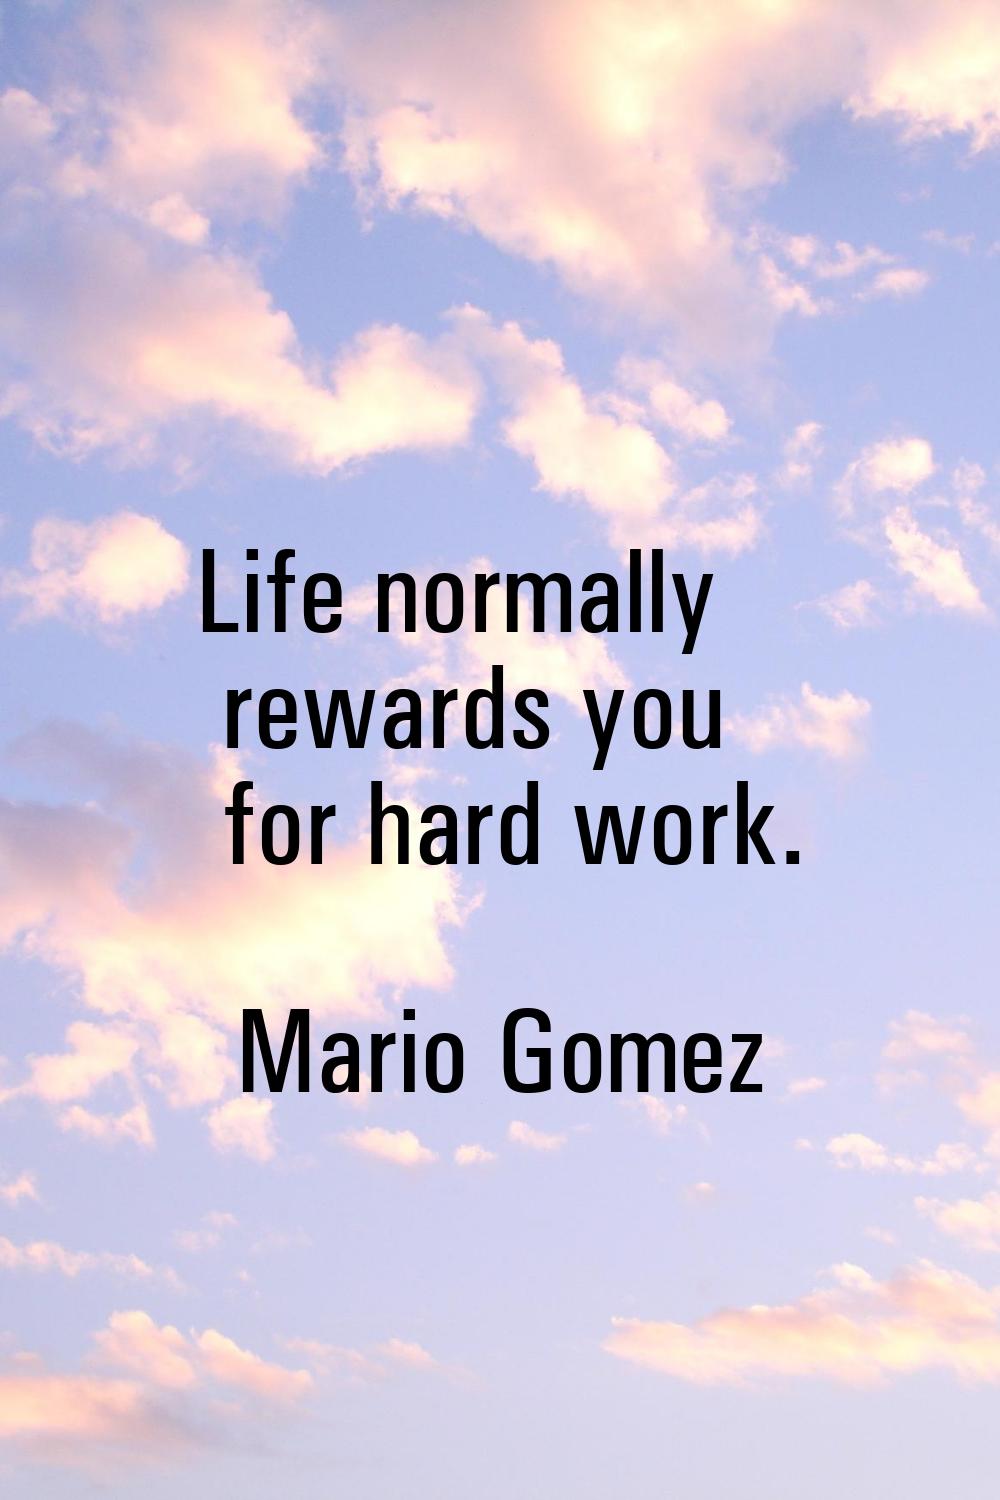 Life normally rewards you for hard work.